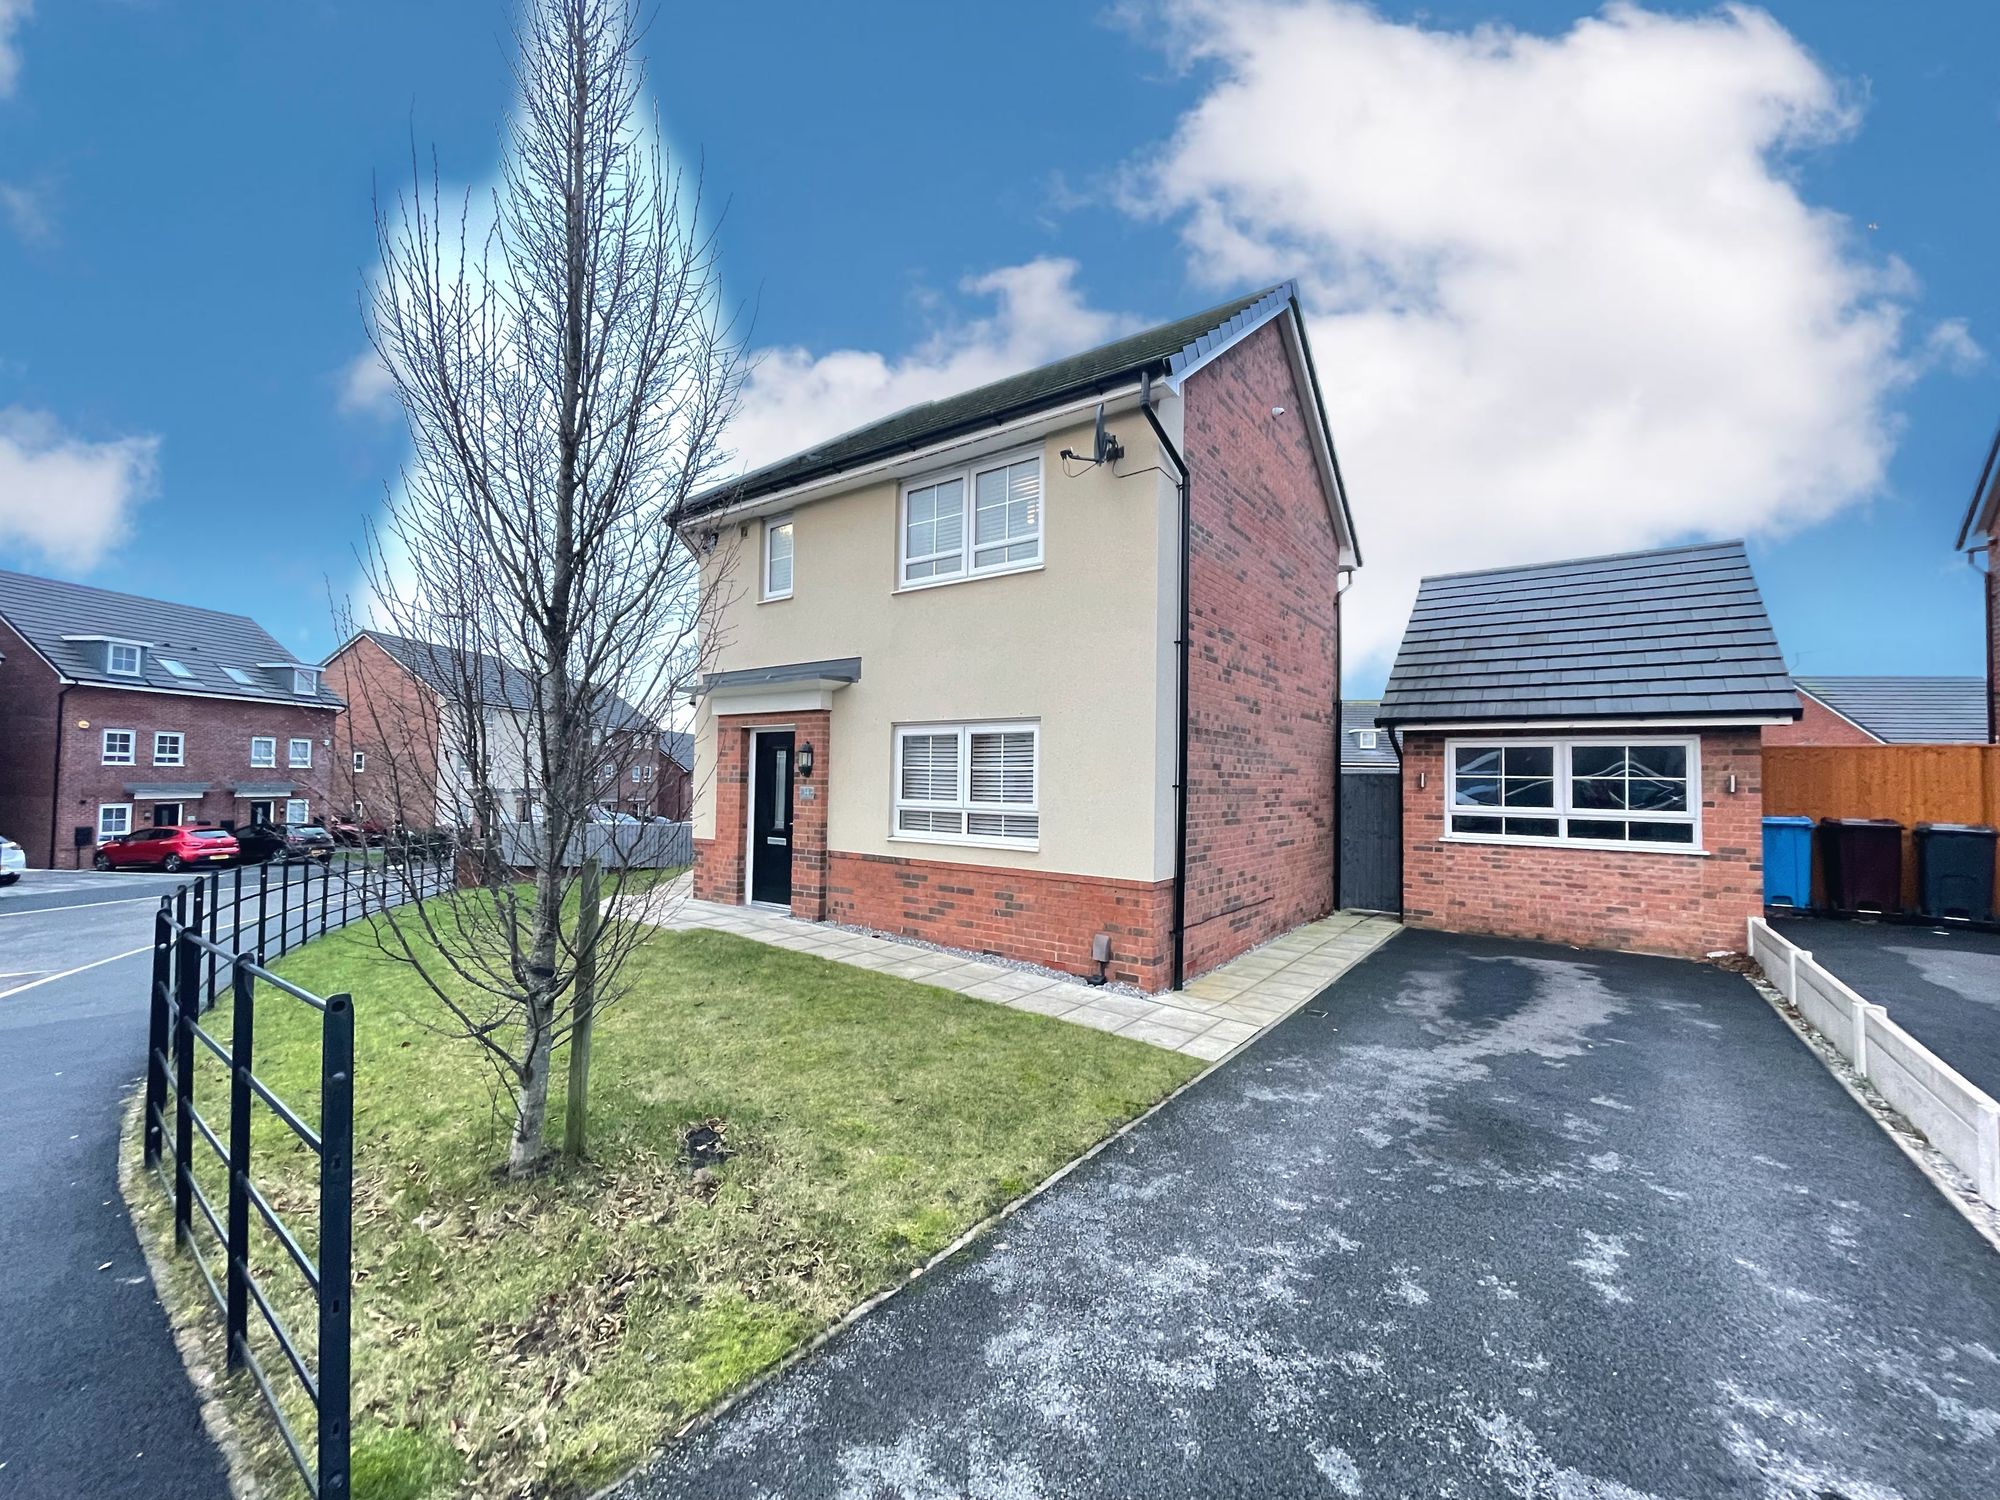 3 bed detached house for sale in Stratford Drive, Prescot, L34 